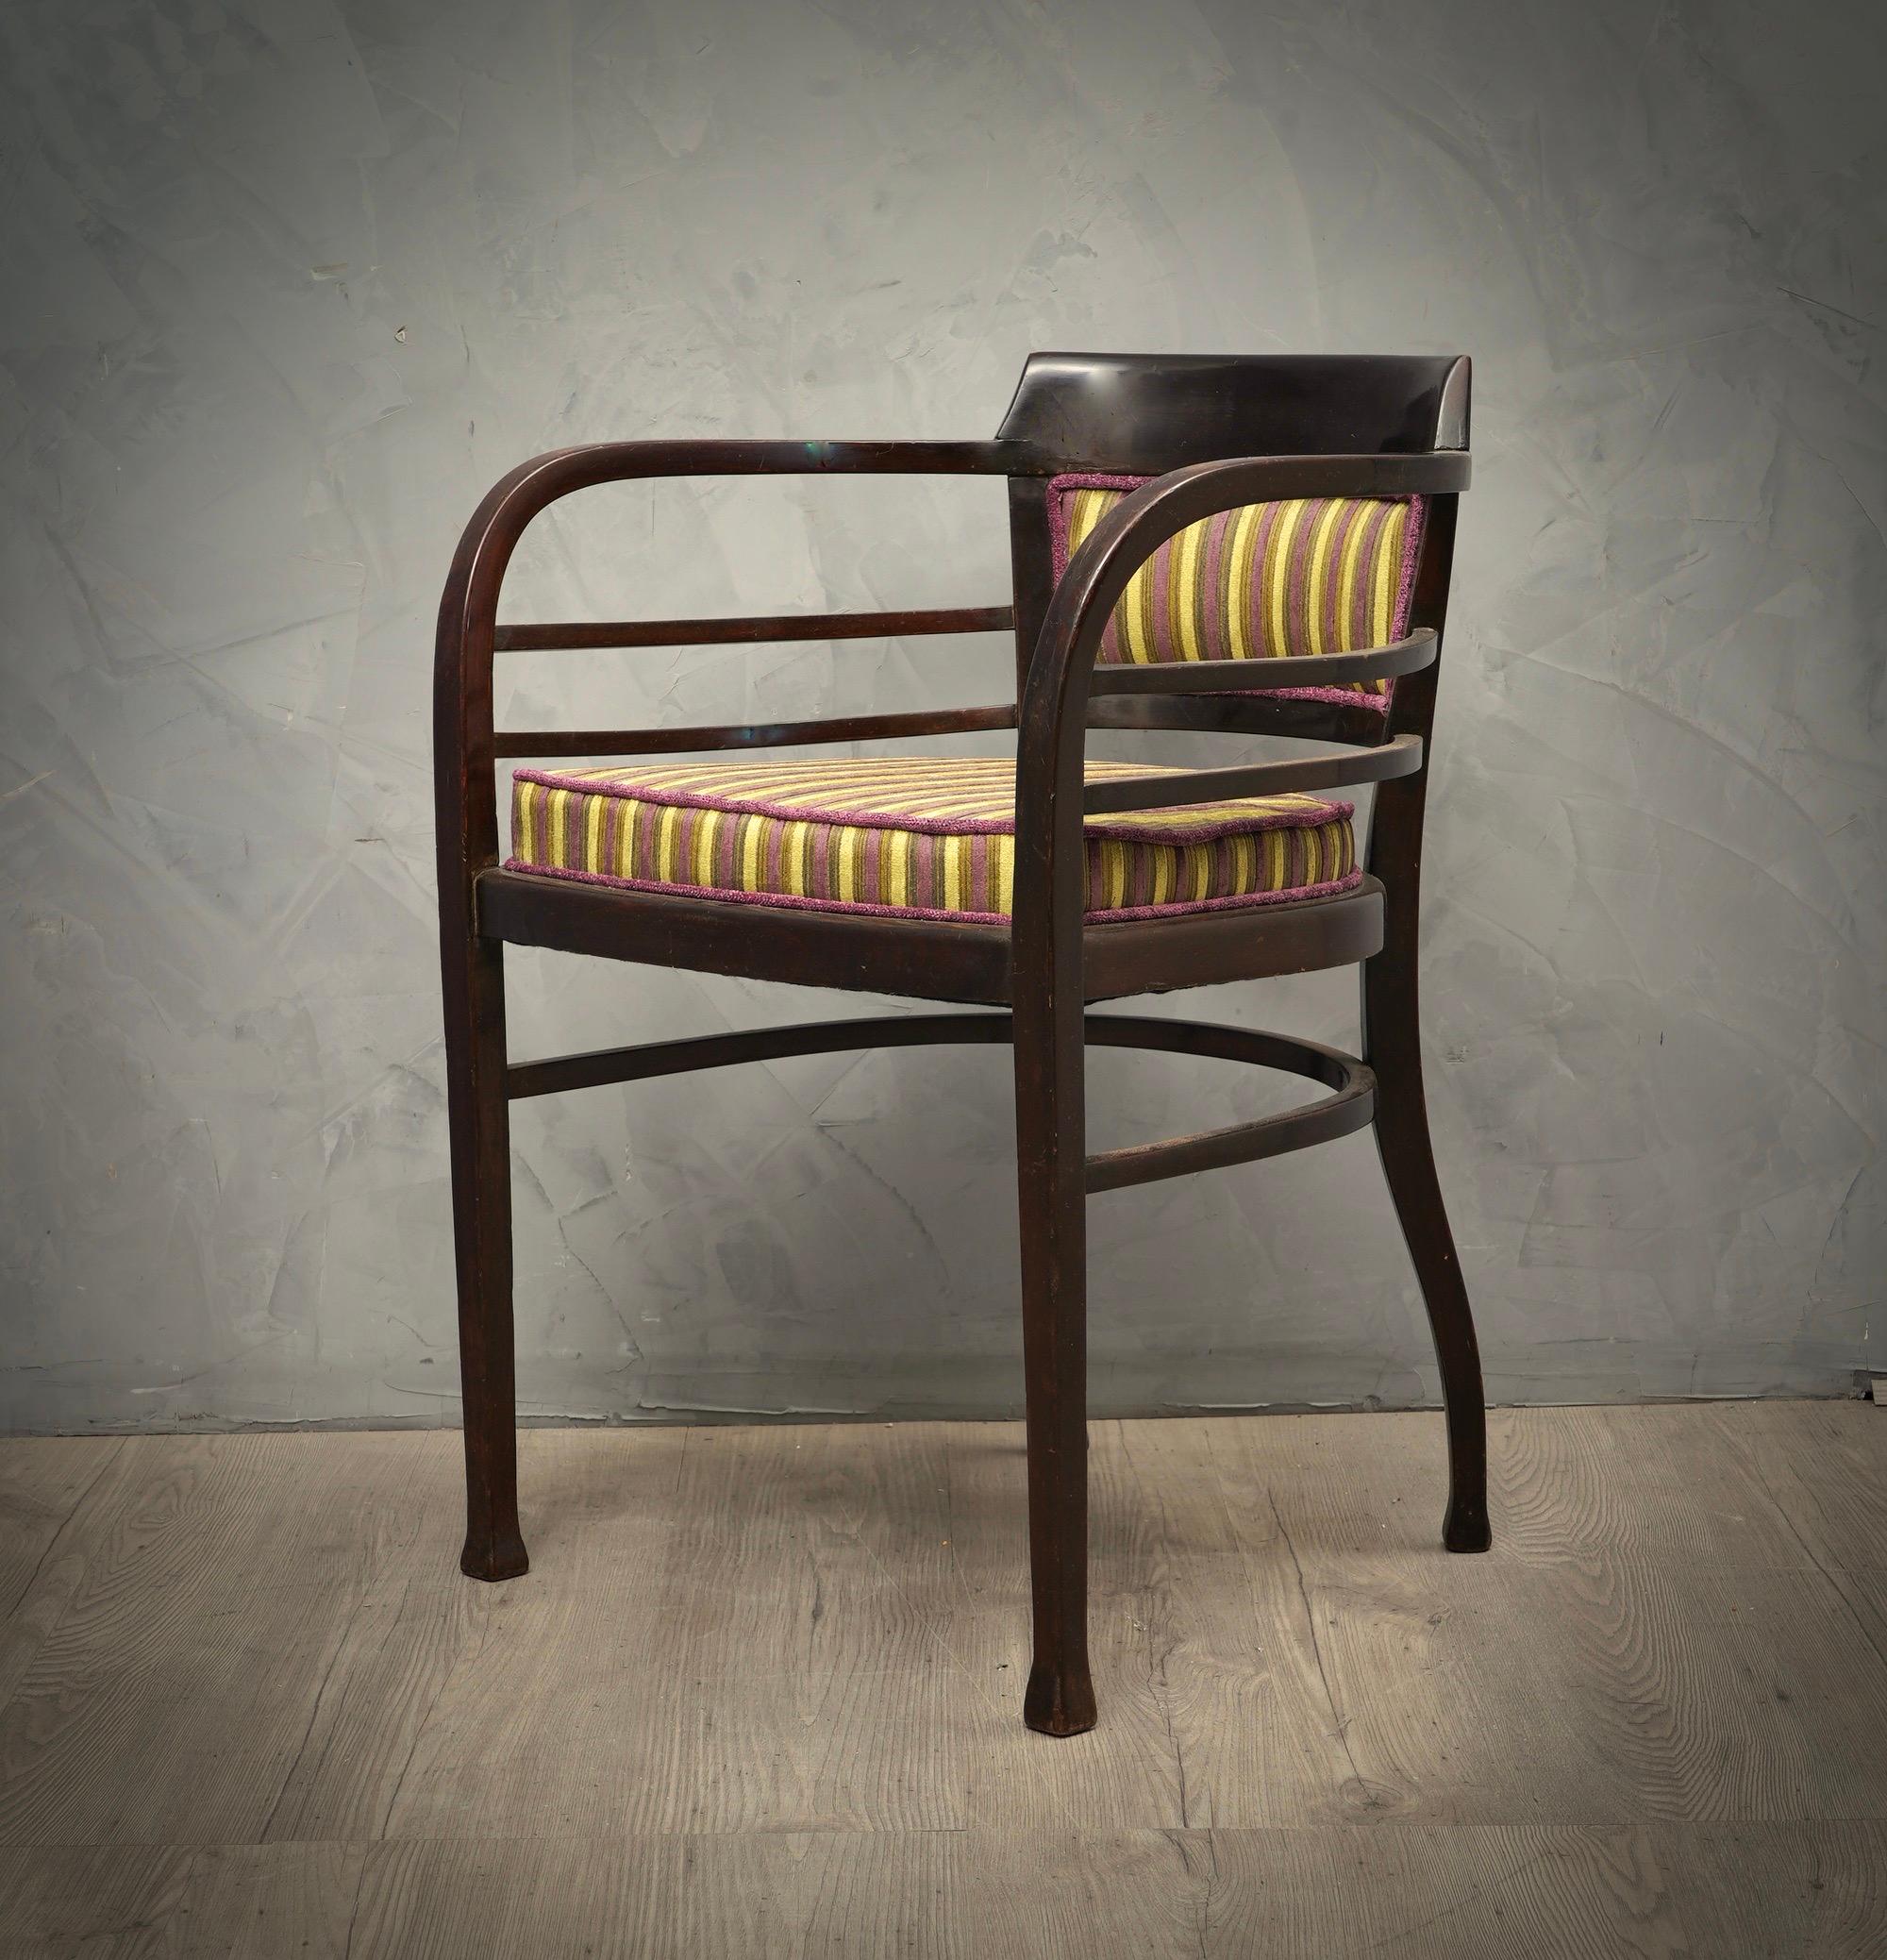 Wonderful armchair of the very early Art Nouveau period, very particular shape for a very particular design, enriched by a very original striped velvet fabric. Elegant and sober design but truly one of a kind.

The armchair was designed by Josef